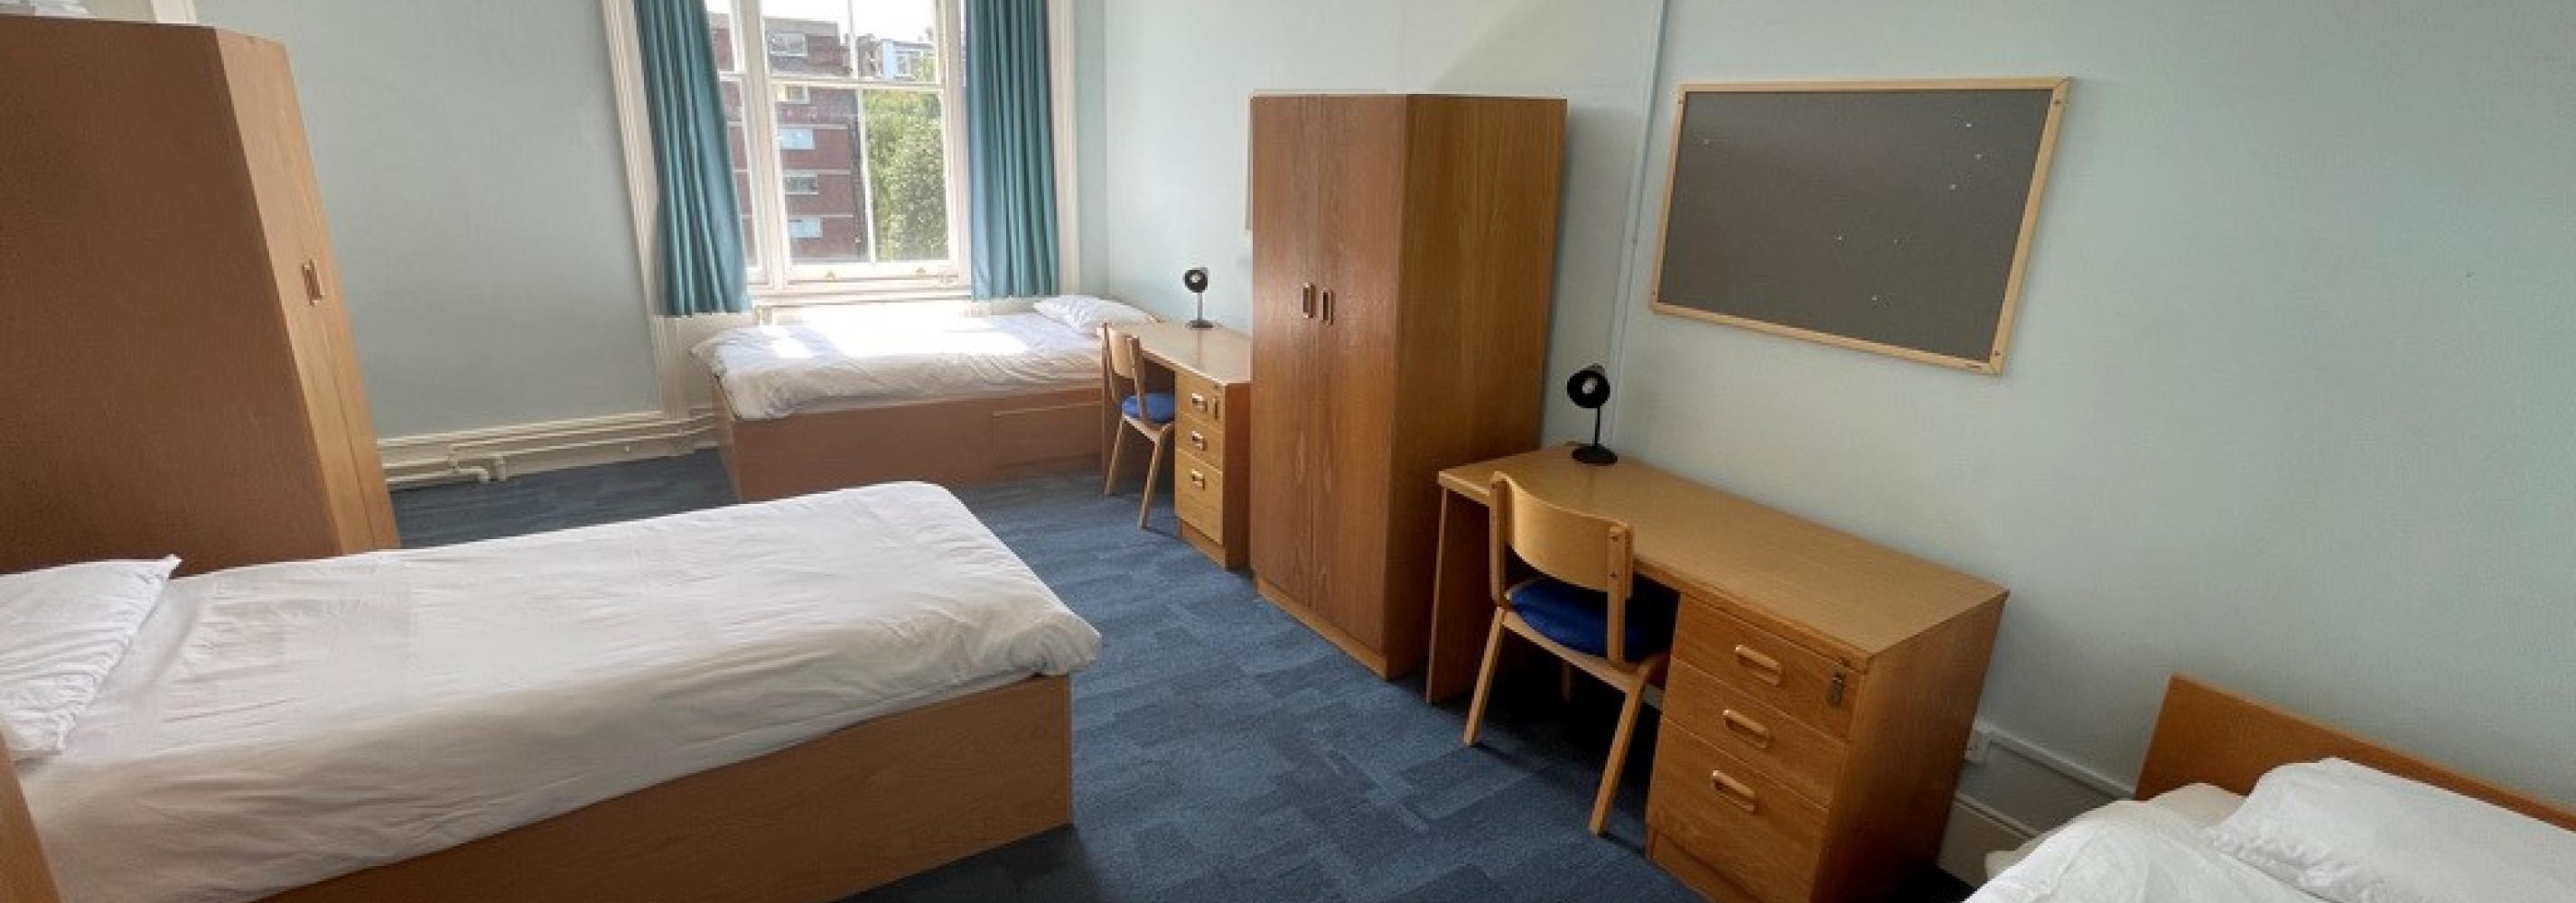 Bedroom with 3 beds and desks for students